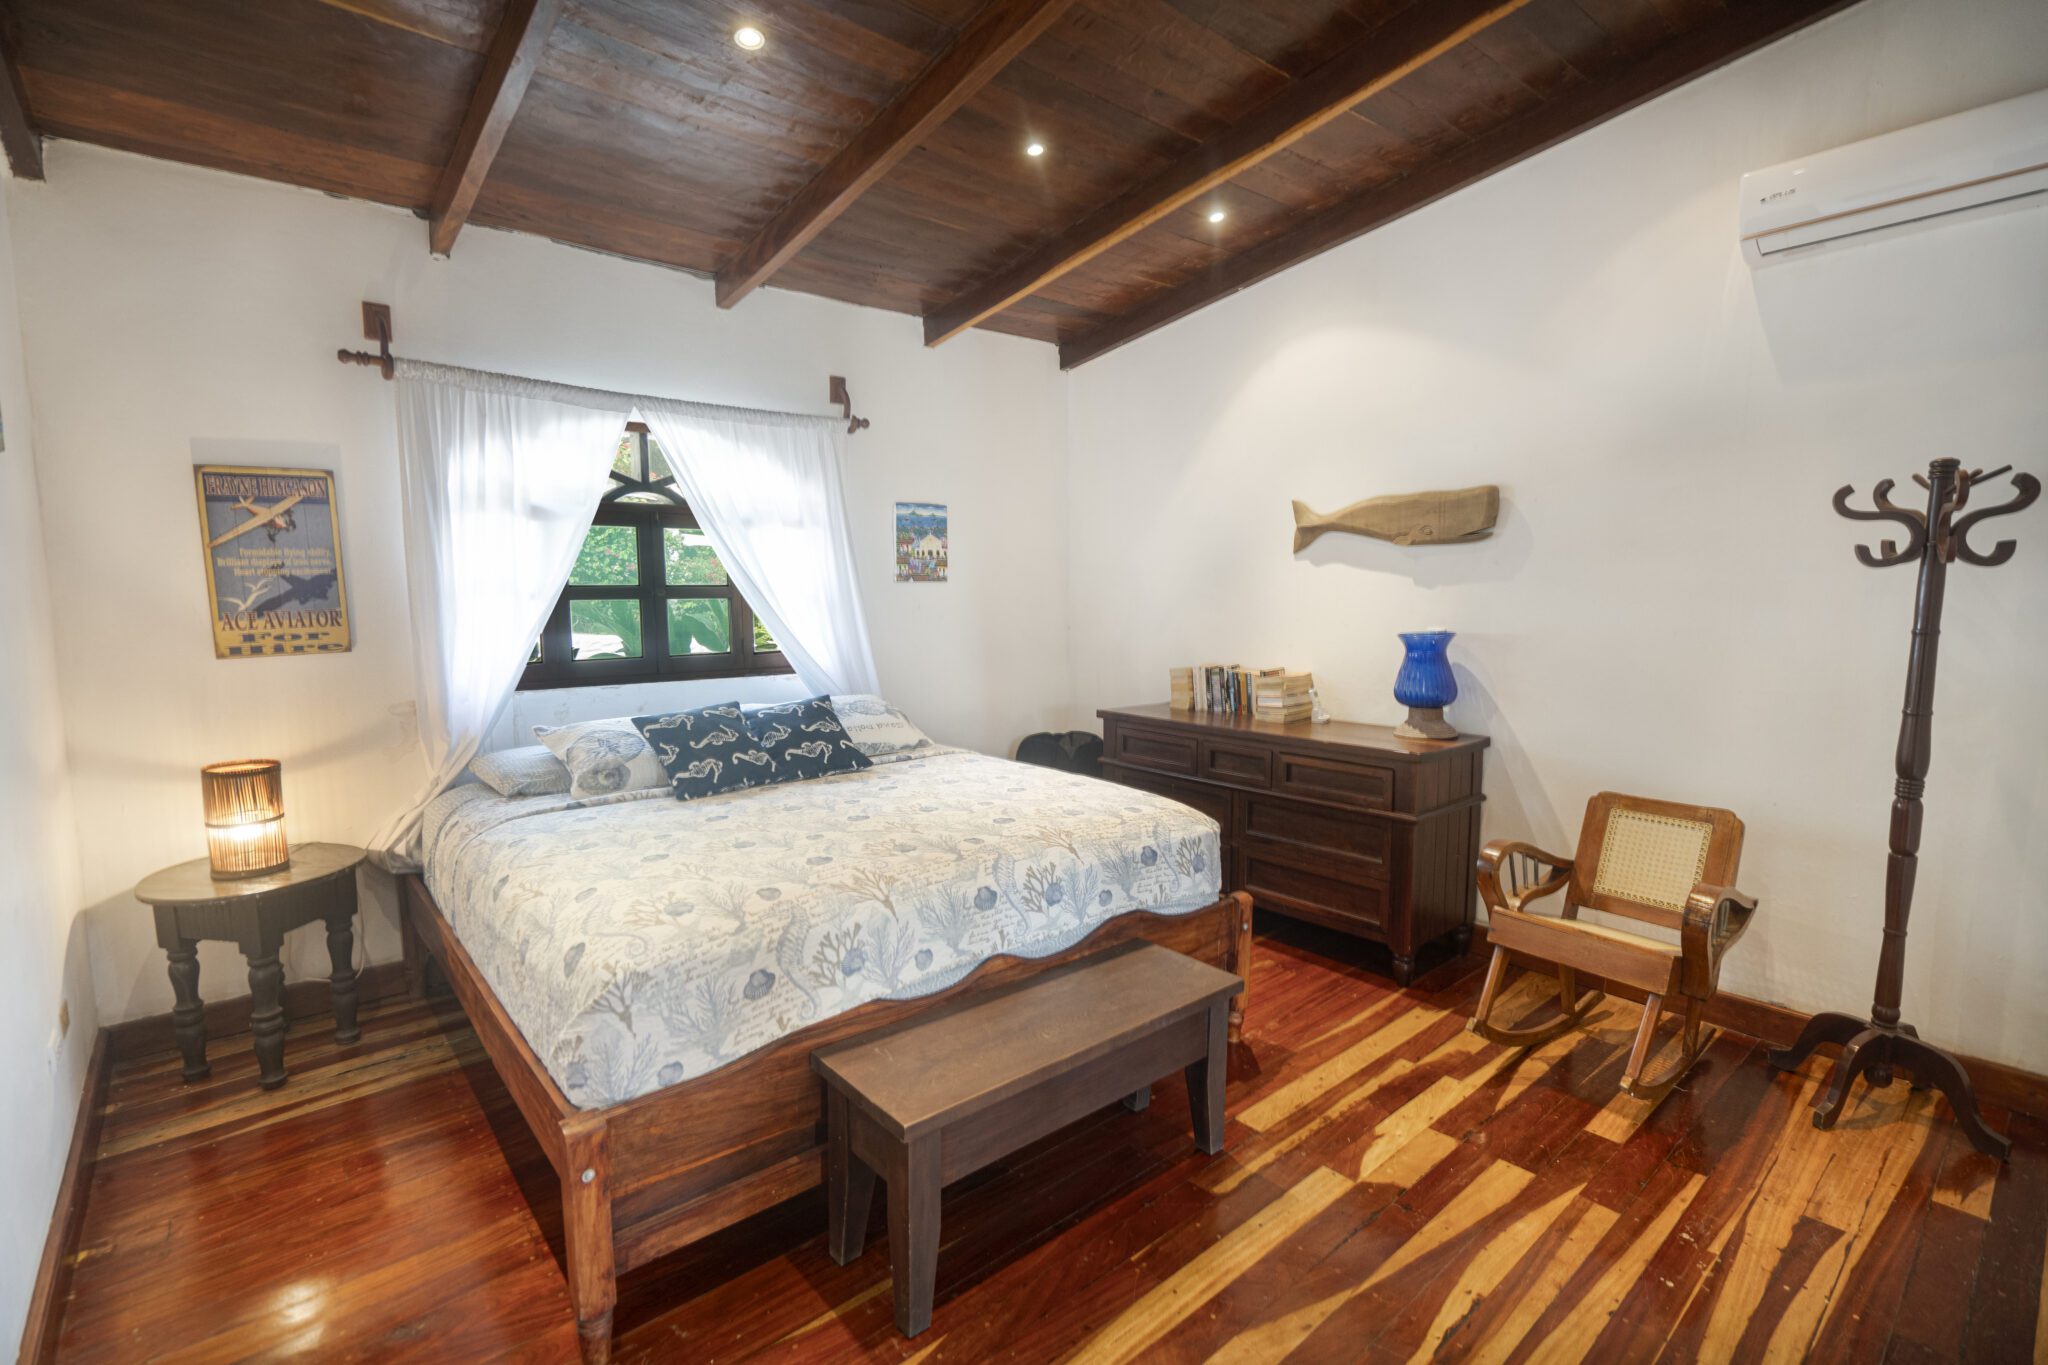 http://view%20of%20the%20room%20from%20a%20Rancho%20Santana%20Property%20for%20Sale%20in%20Nicaragua%20B13